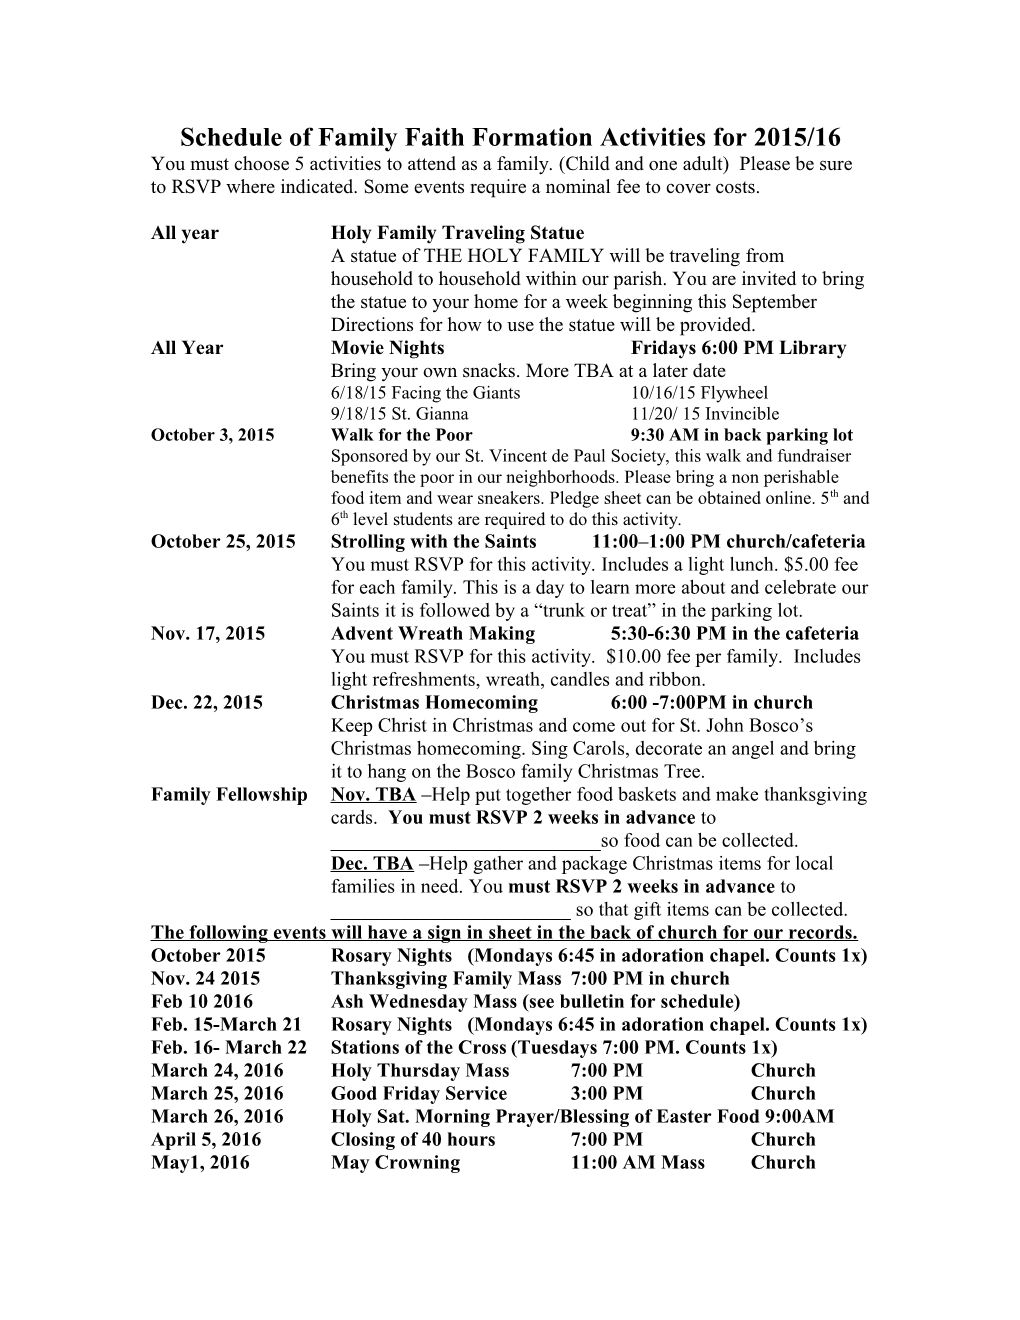 Preliminary Schedule of Family Faith Formation Activities for 2011/12